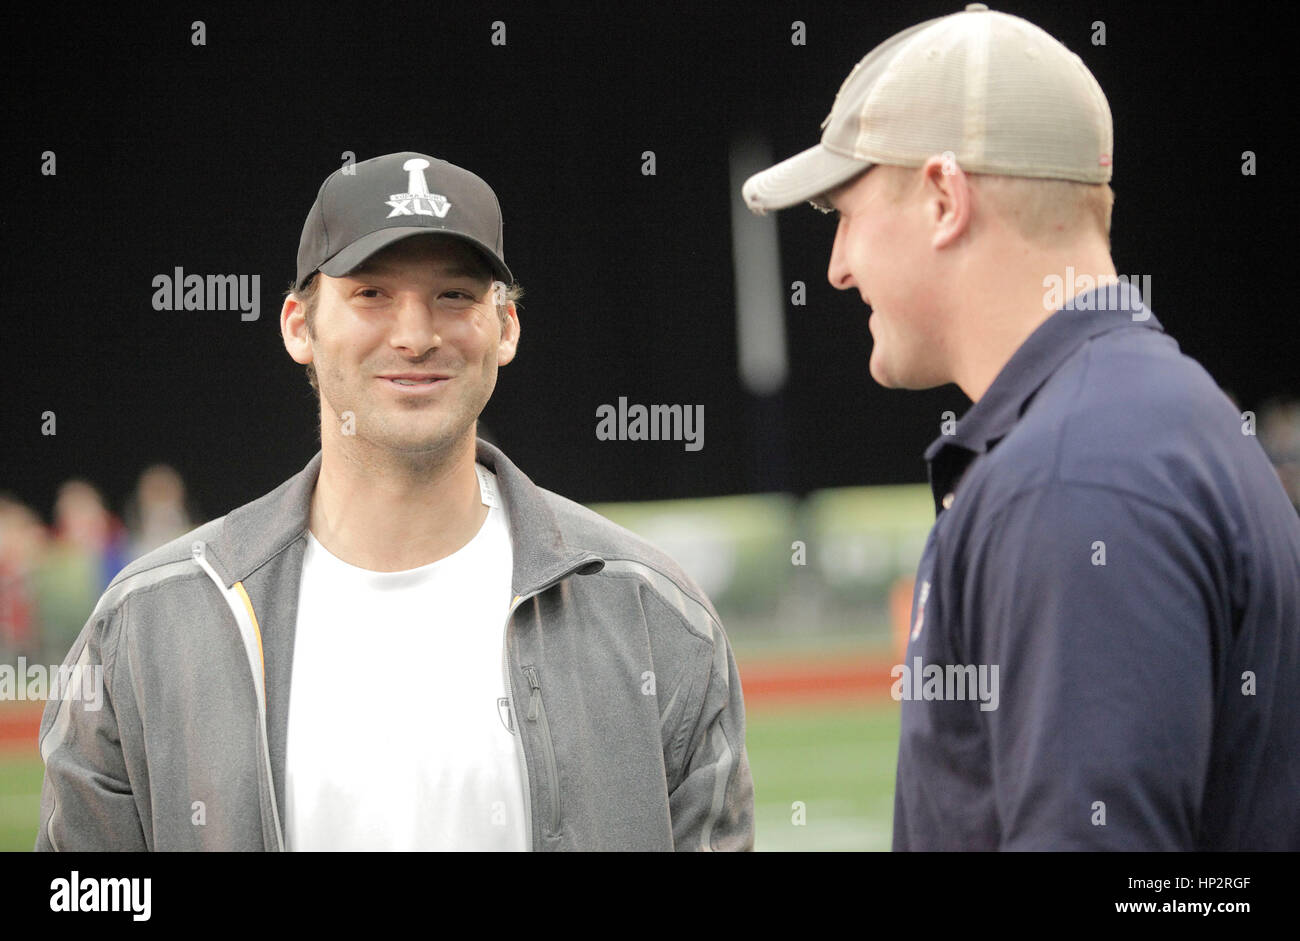 Dallas Cowboys quarterback Tony Romo, left, with teammate Jason Witten at the Tazon Latino flag football game at Super Bowl NFL Experience at the Dallas Convention Center on February 2, 2011 in Dallas, Texas. Photo by Francis Specker Stock Photo